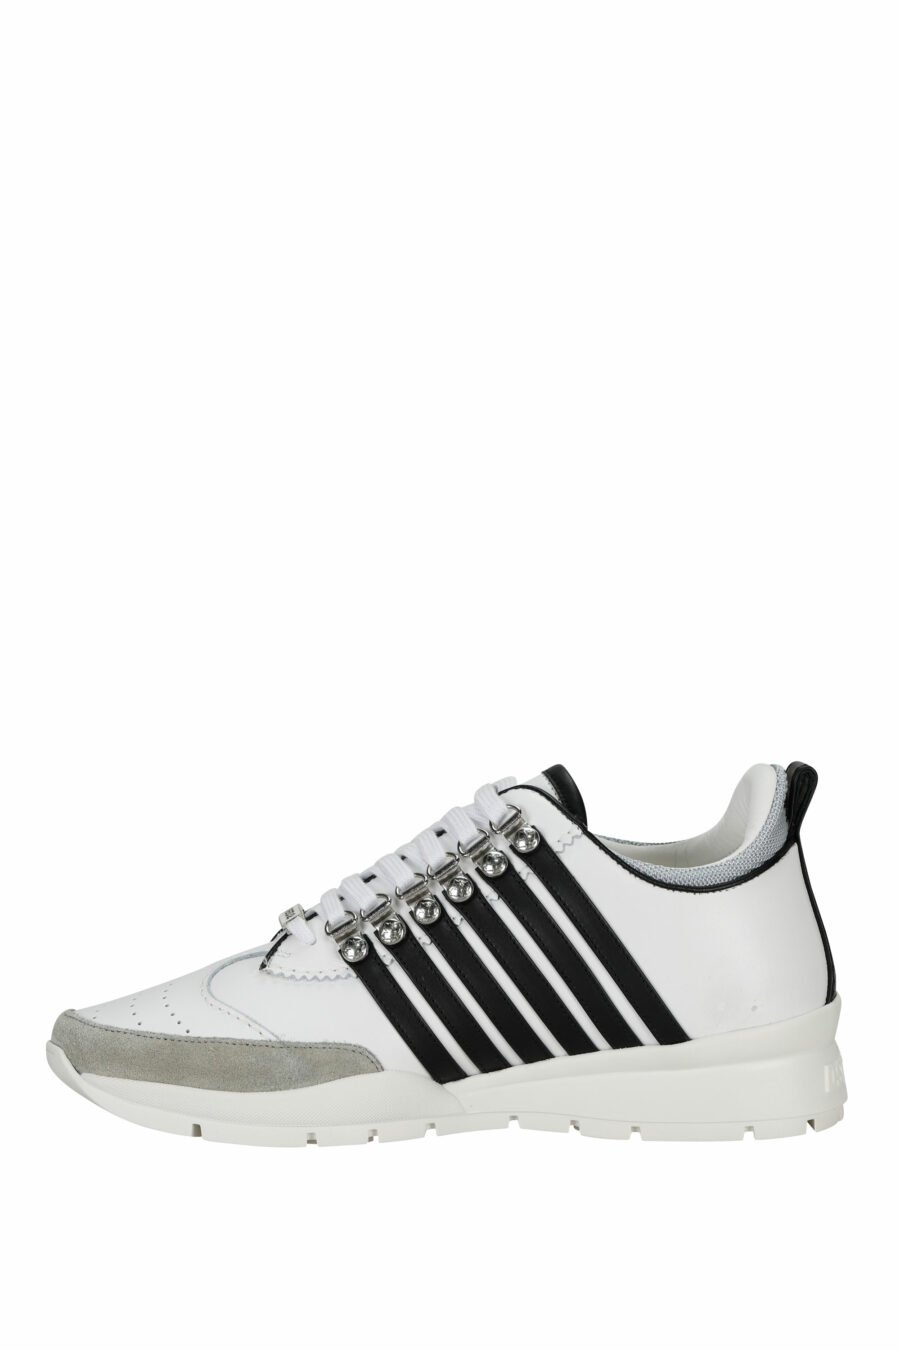 White trainers "legendary" with black stripes - 8055777300930 2